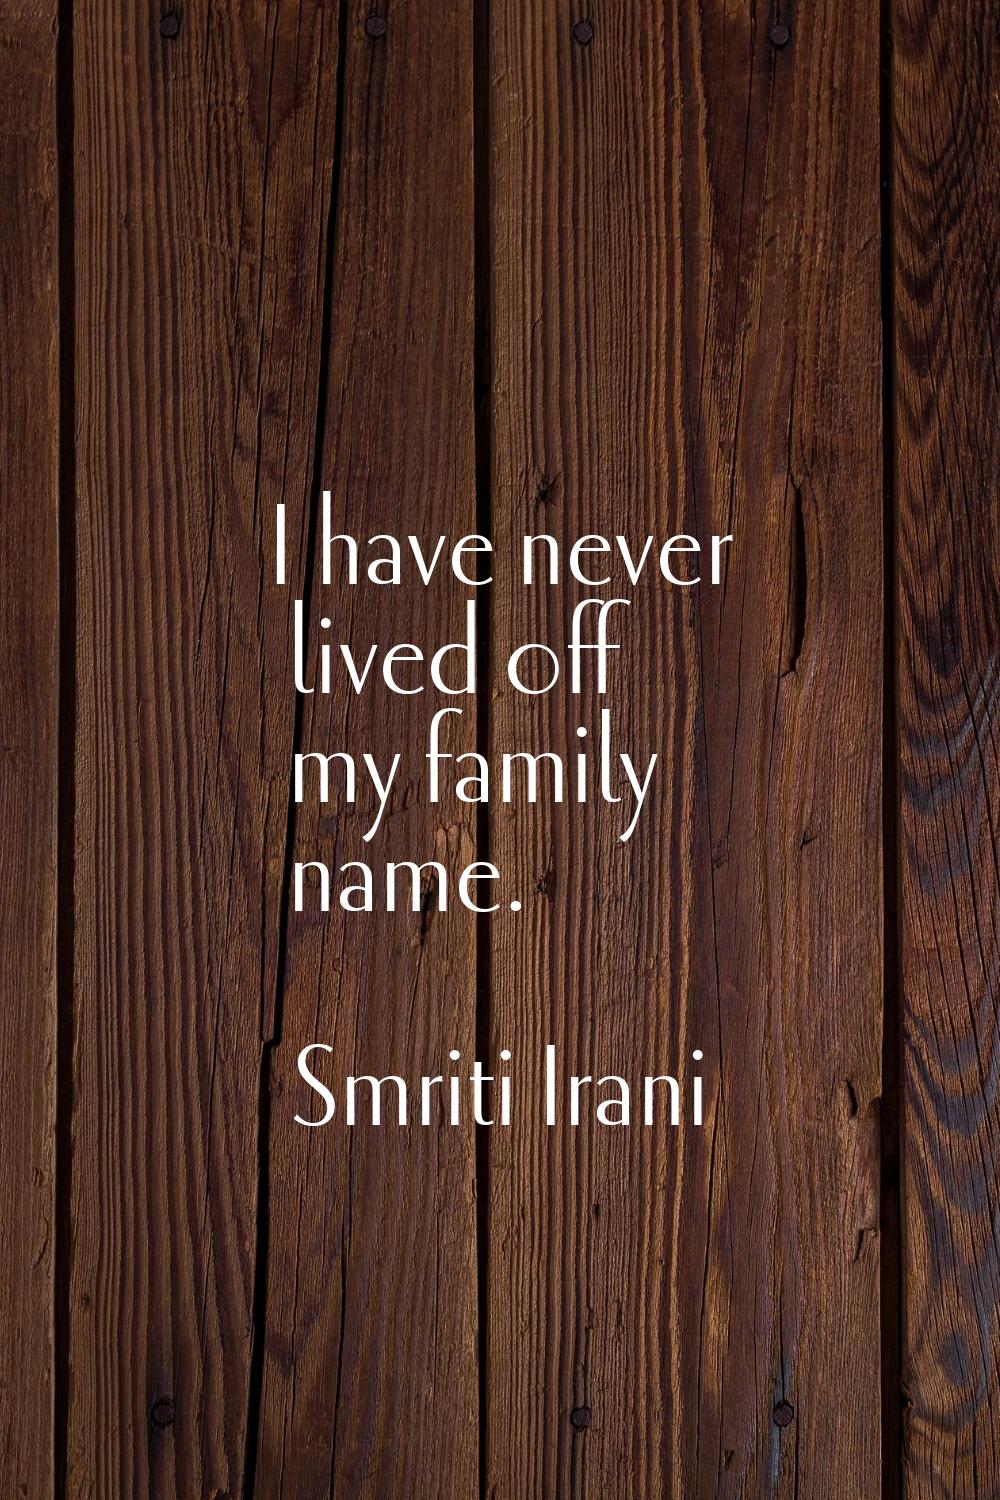 I have never lived off my family name.